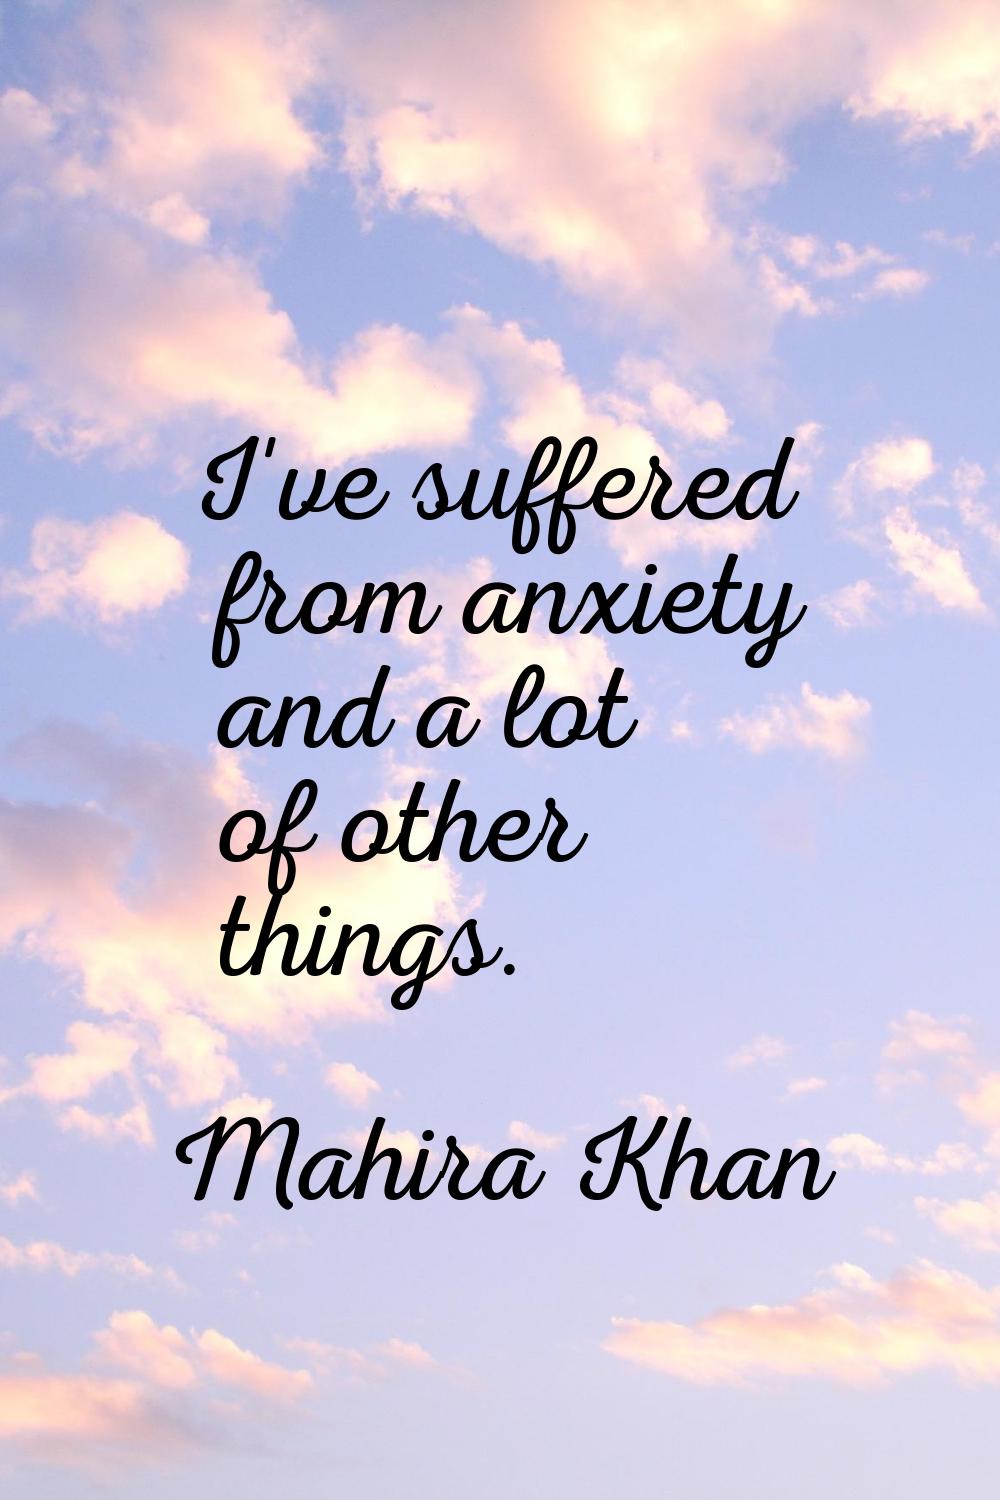 I've suffered from anxiety and a lot of other things.